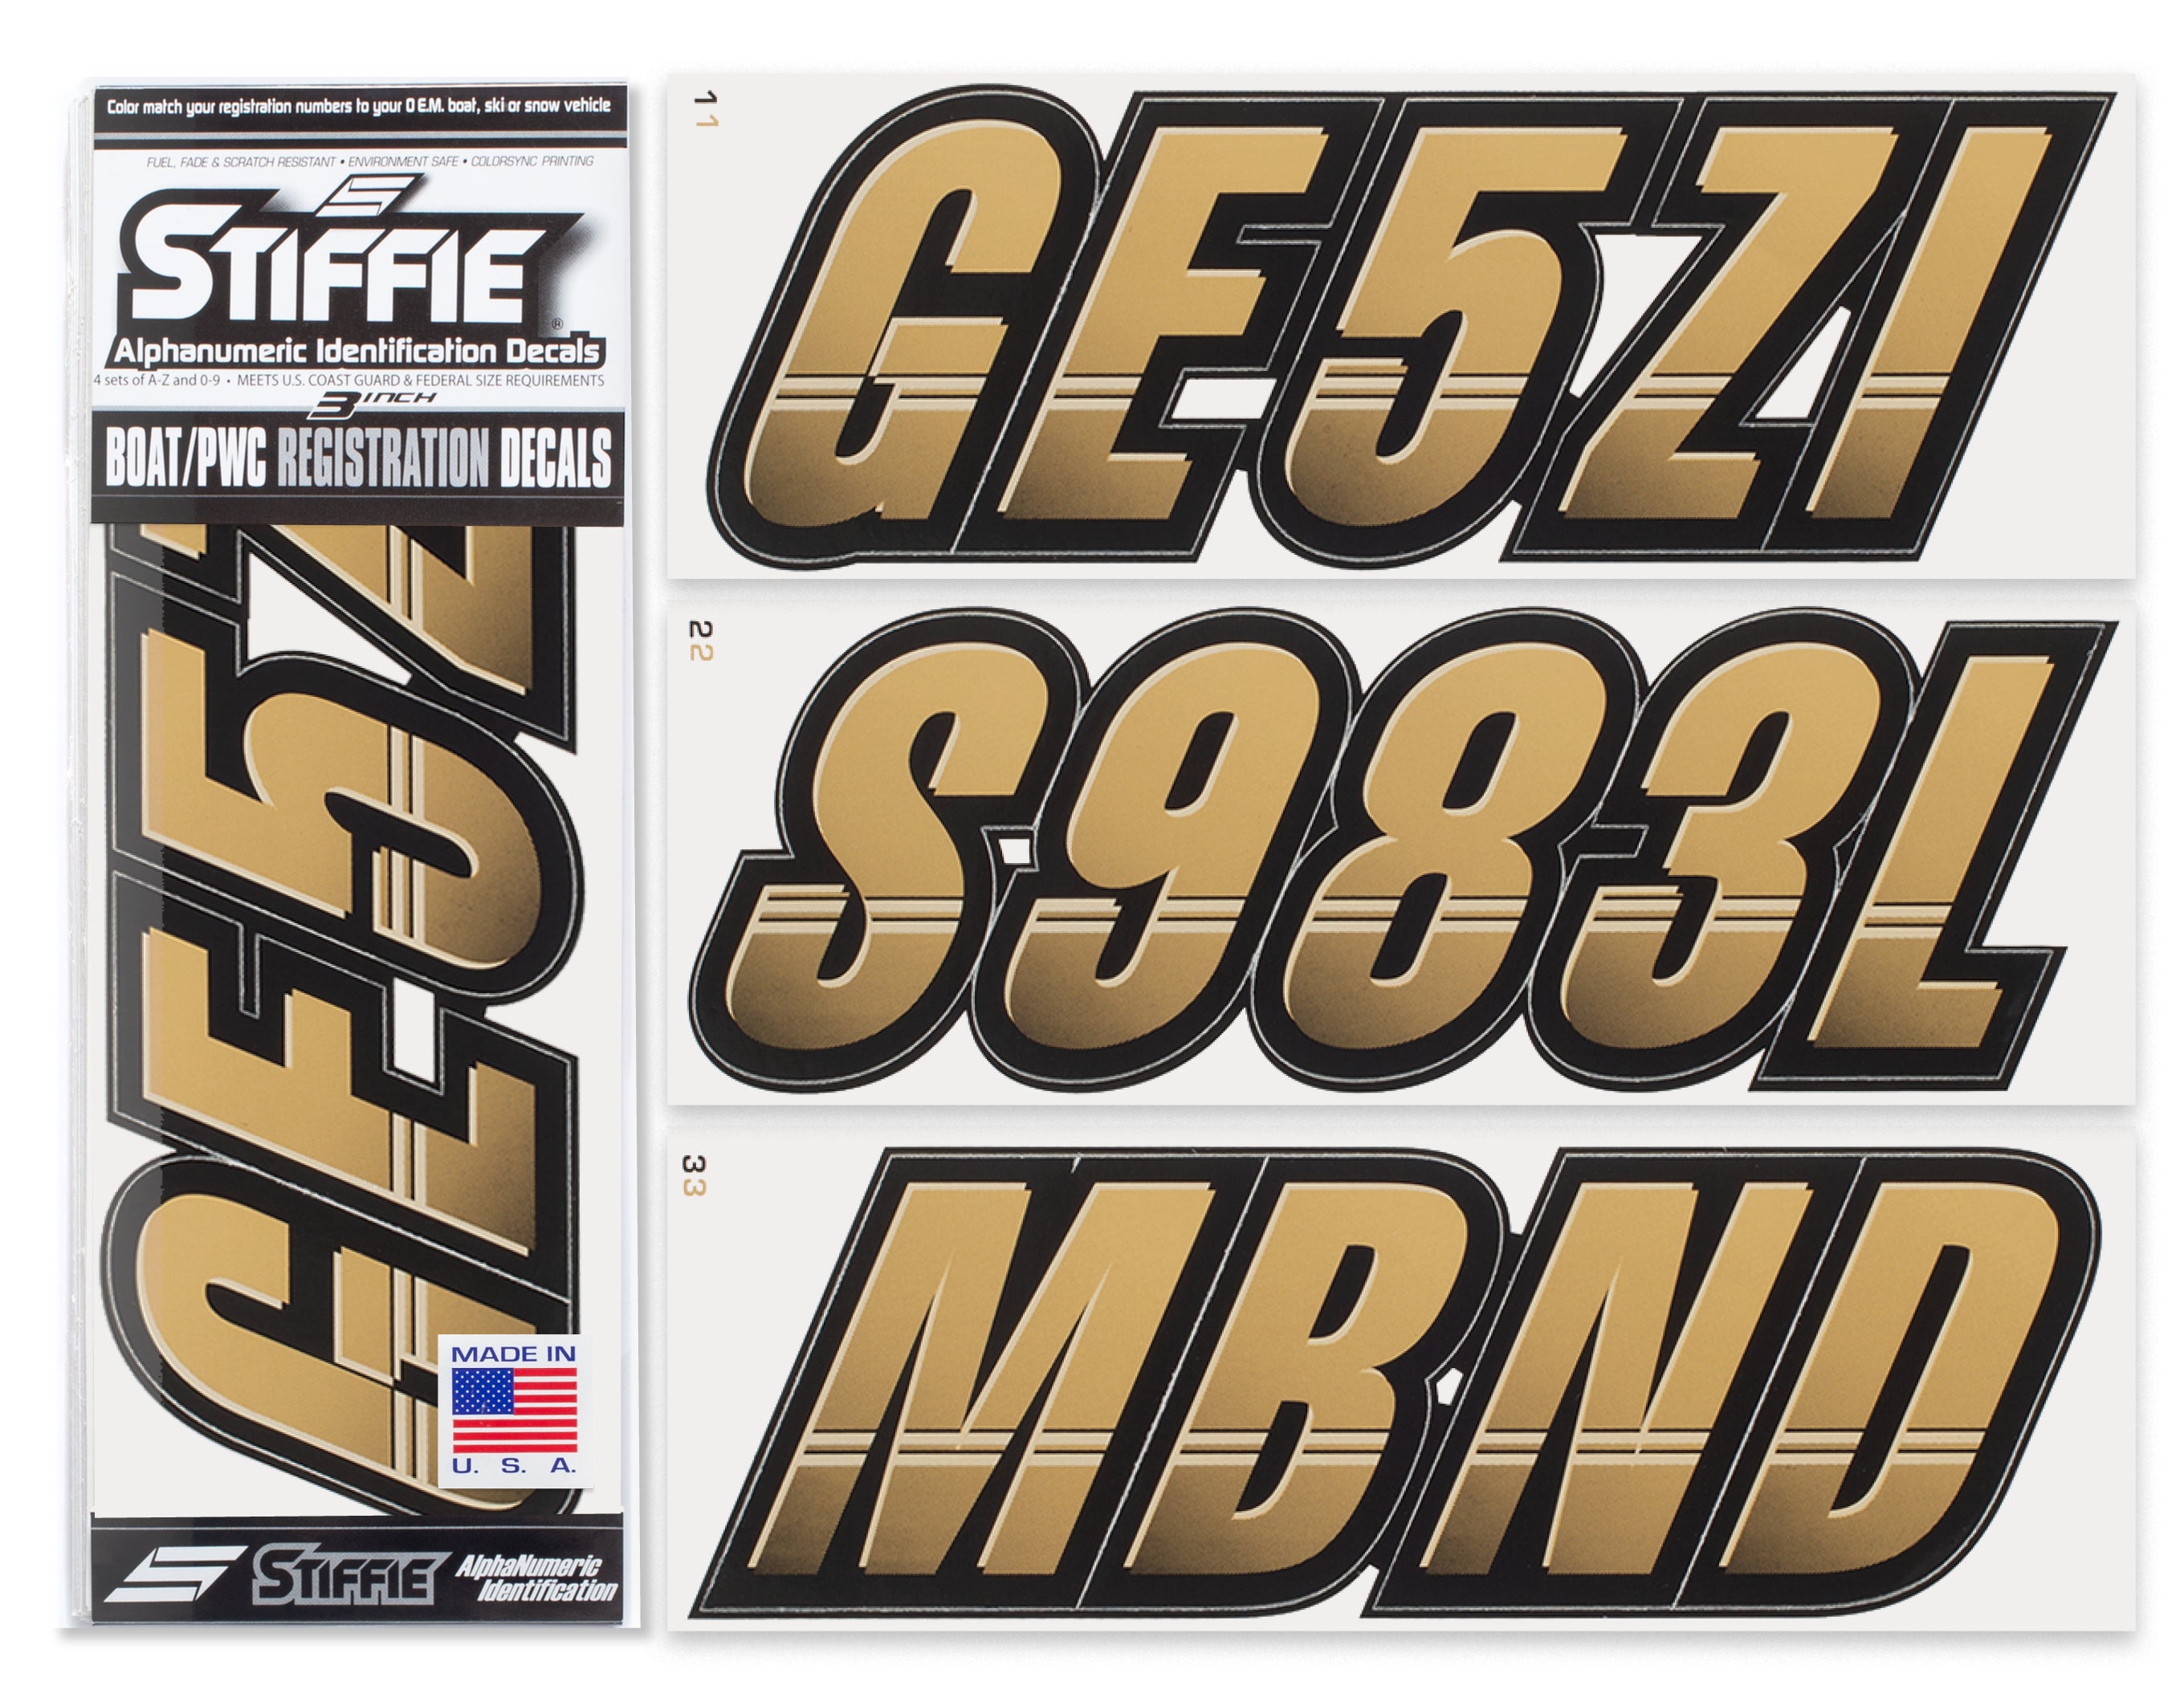 Stiffie Techtron Tan/Black 3" Alpha-Numeric Registration Identification Numbers Stickers Decals for Boats & Personal Watercraft